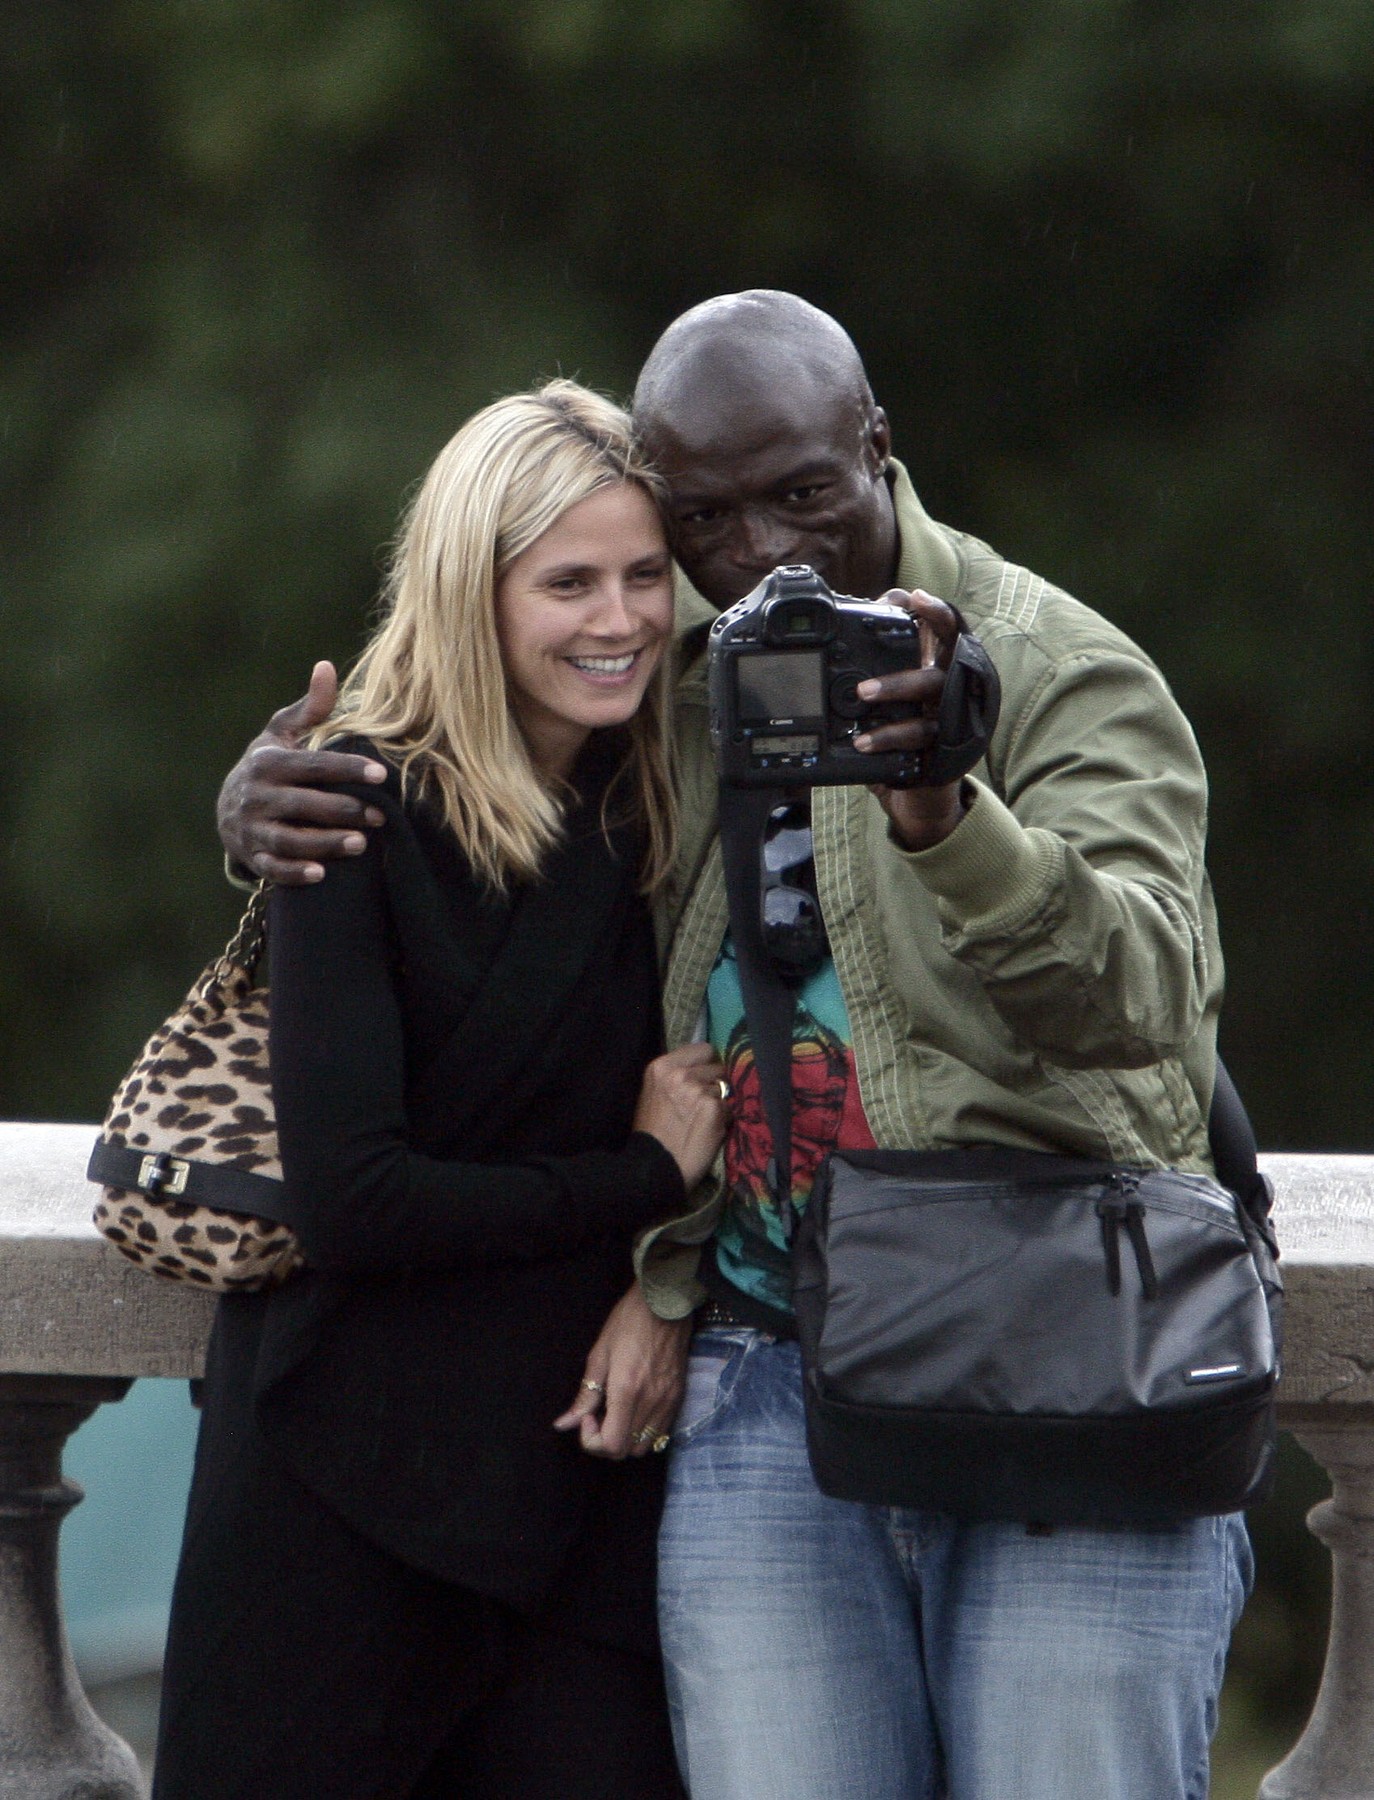 US singer Seal and german top model heidi Klum spend holiday in Paris without their kid. The couple enjoyed the city of love. They visited the sacre-coeur on the famous  Butte Montmartre,had a few drink and eat french pancakes Paris,August 21th 2008,Image: 26755492, License: Rights-managed, Restrictions: , Model Release: no, Credit line: DKRLSN / KCS Presse / Profimedia